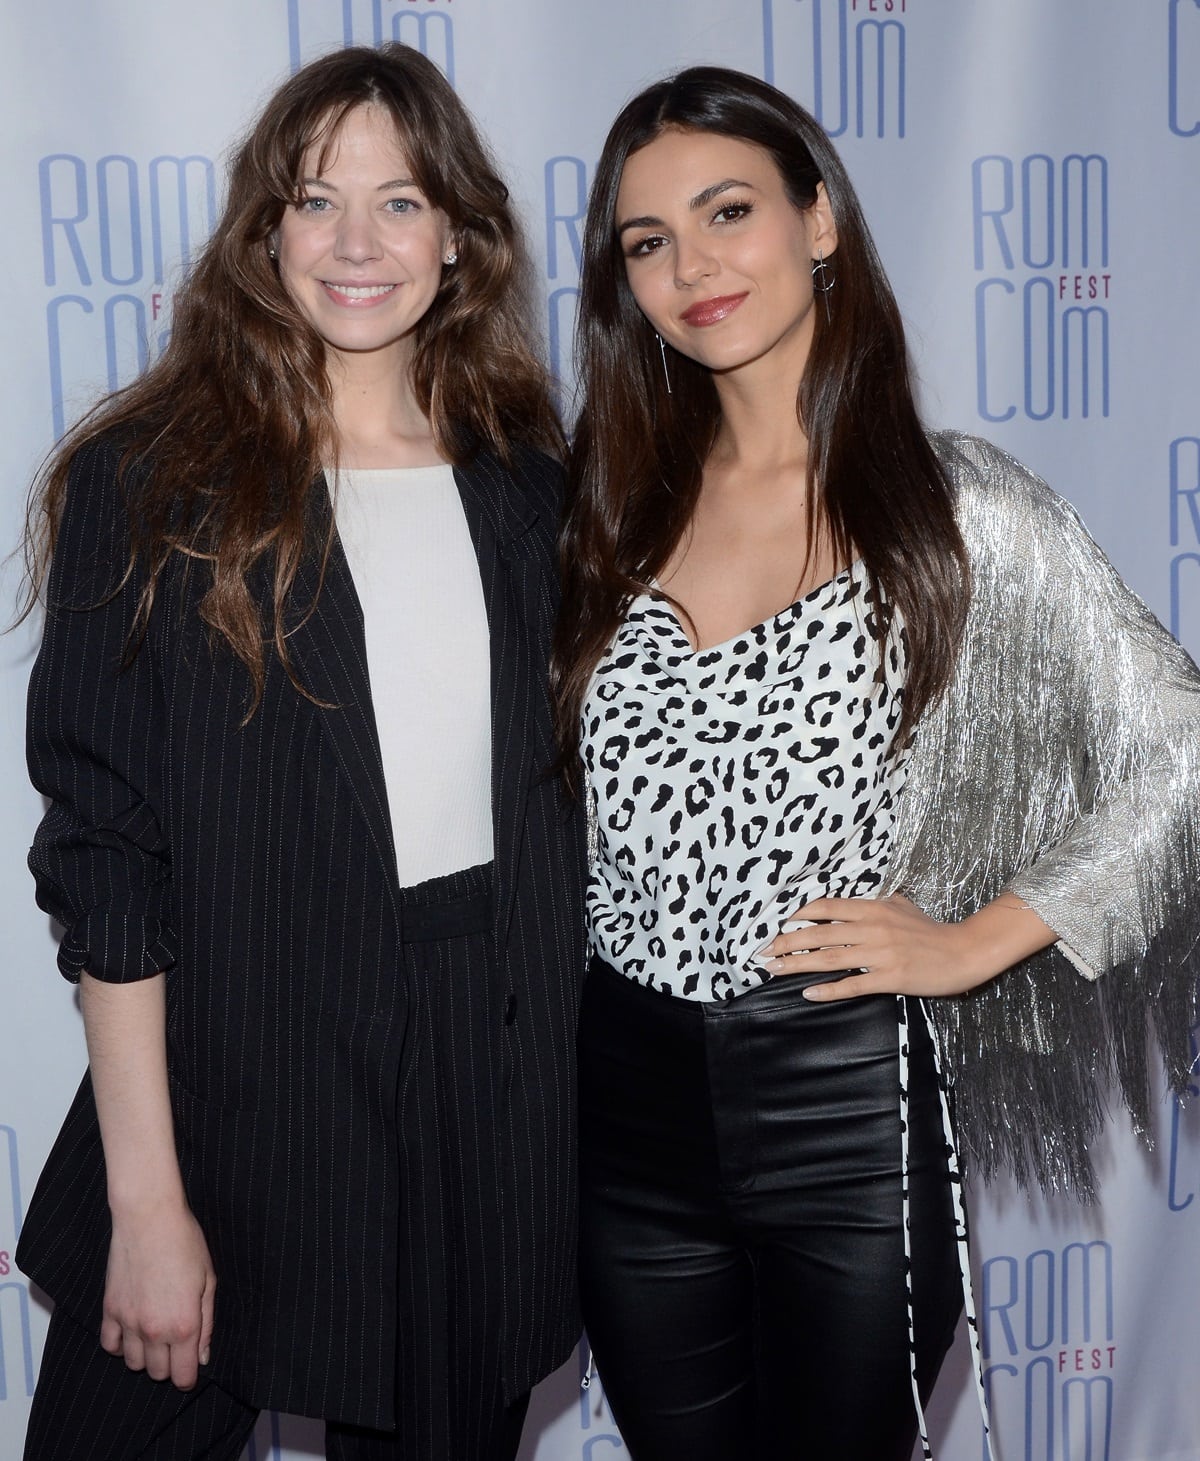 At the 2019 Rom Com Fest in Los Angeles, Lio Tipton (formerly Analeigh Tipton), standing at 5ft 9 ½ inches (176.5 cm), towered over Victoria Justice, who is 5ft 5 inches (165.1 cm) tall